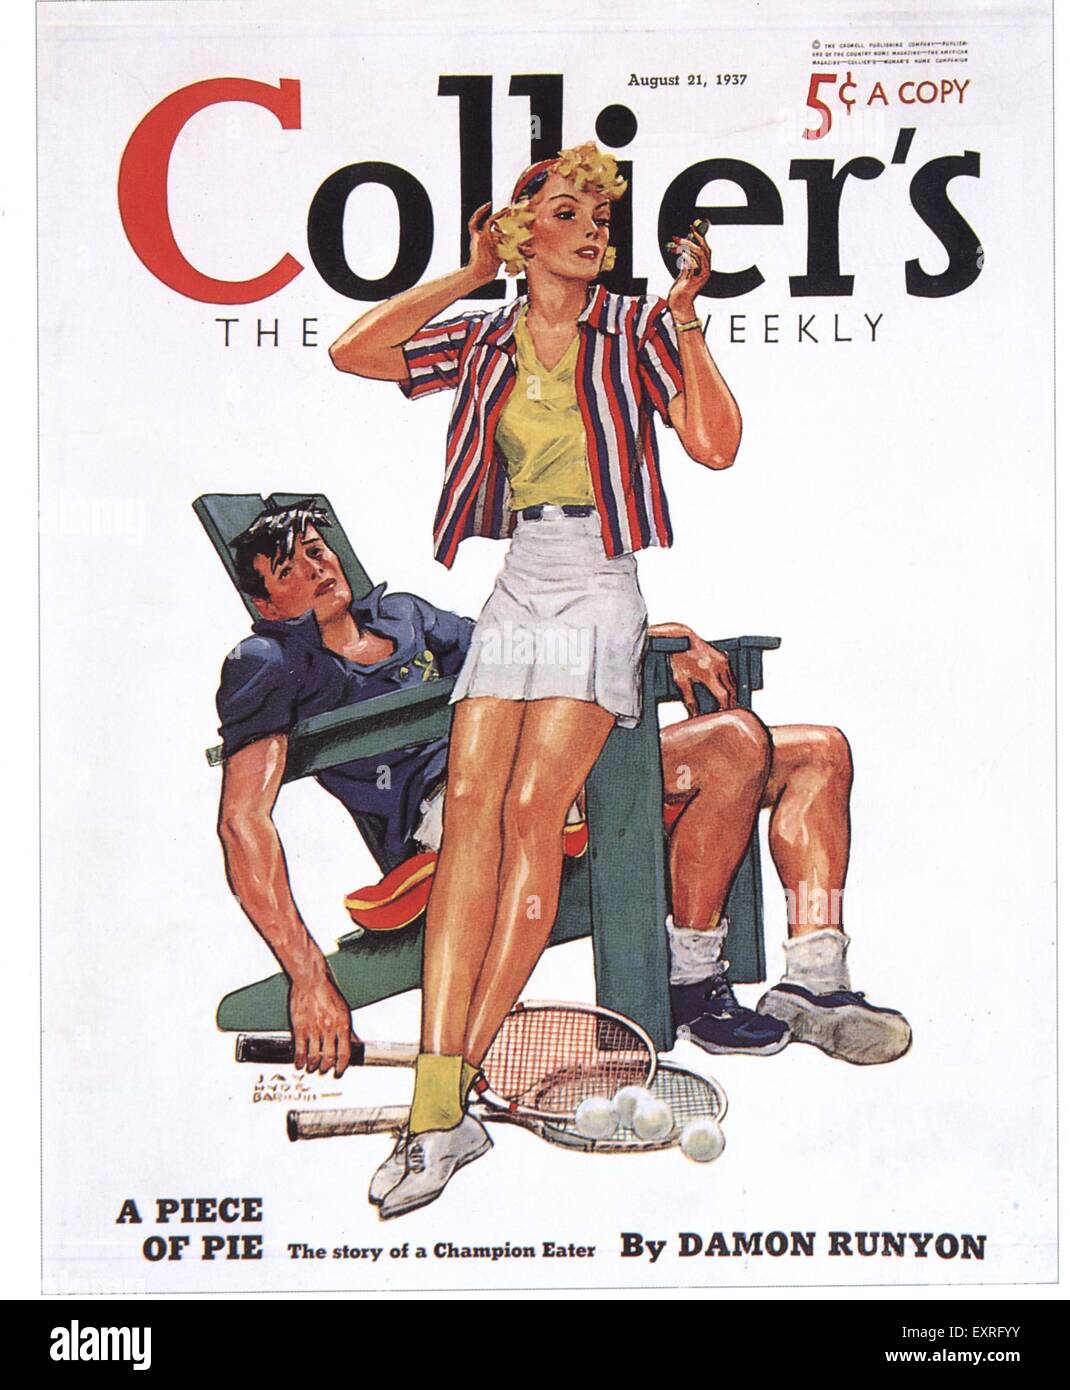 Colliers Magazine Cover - 1931 - Ice Hockey Players